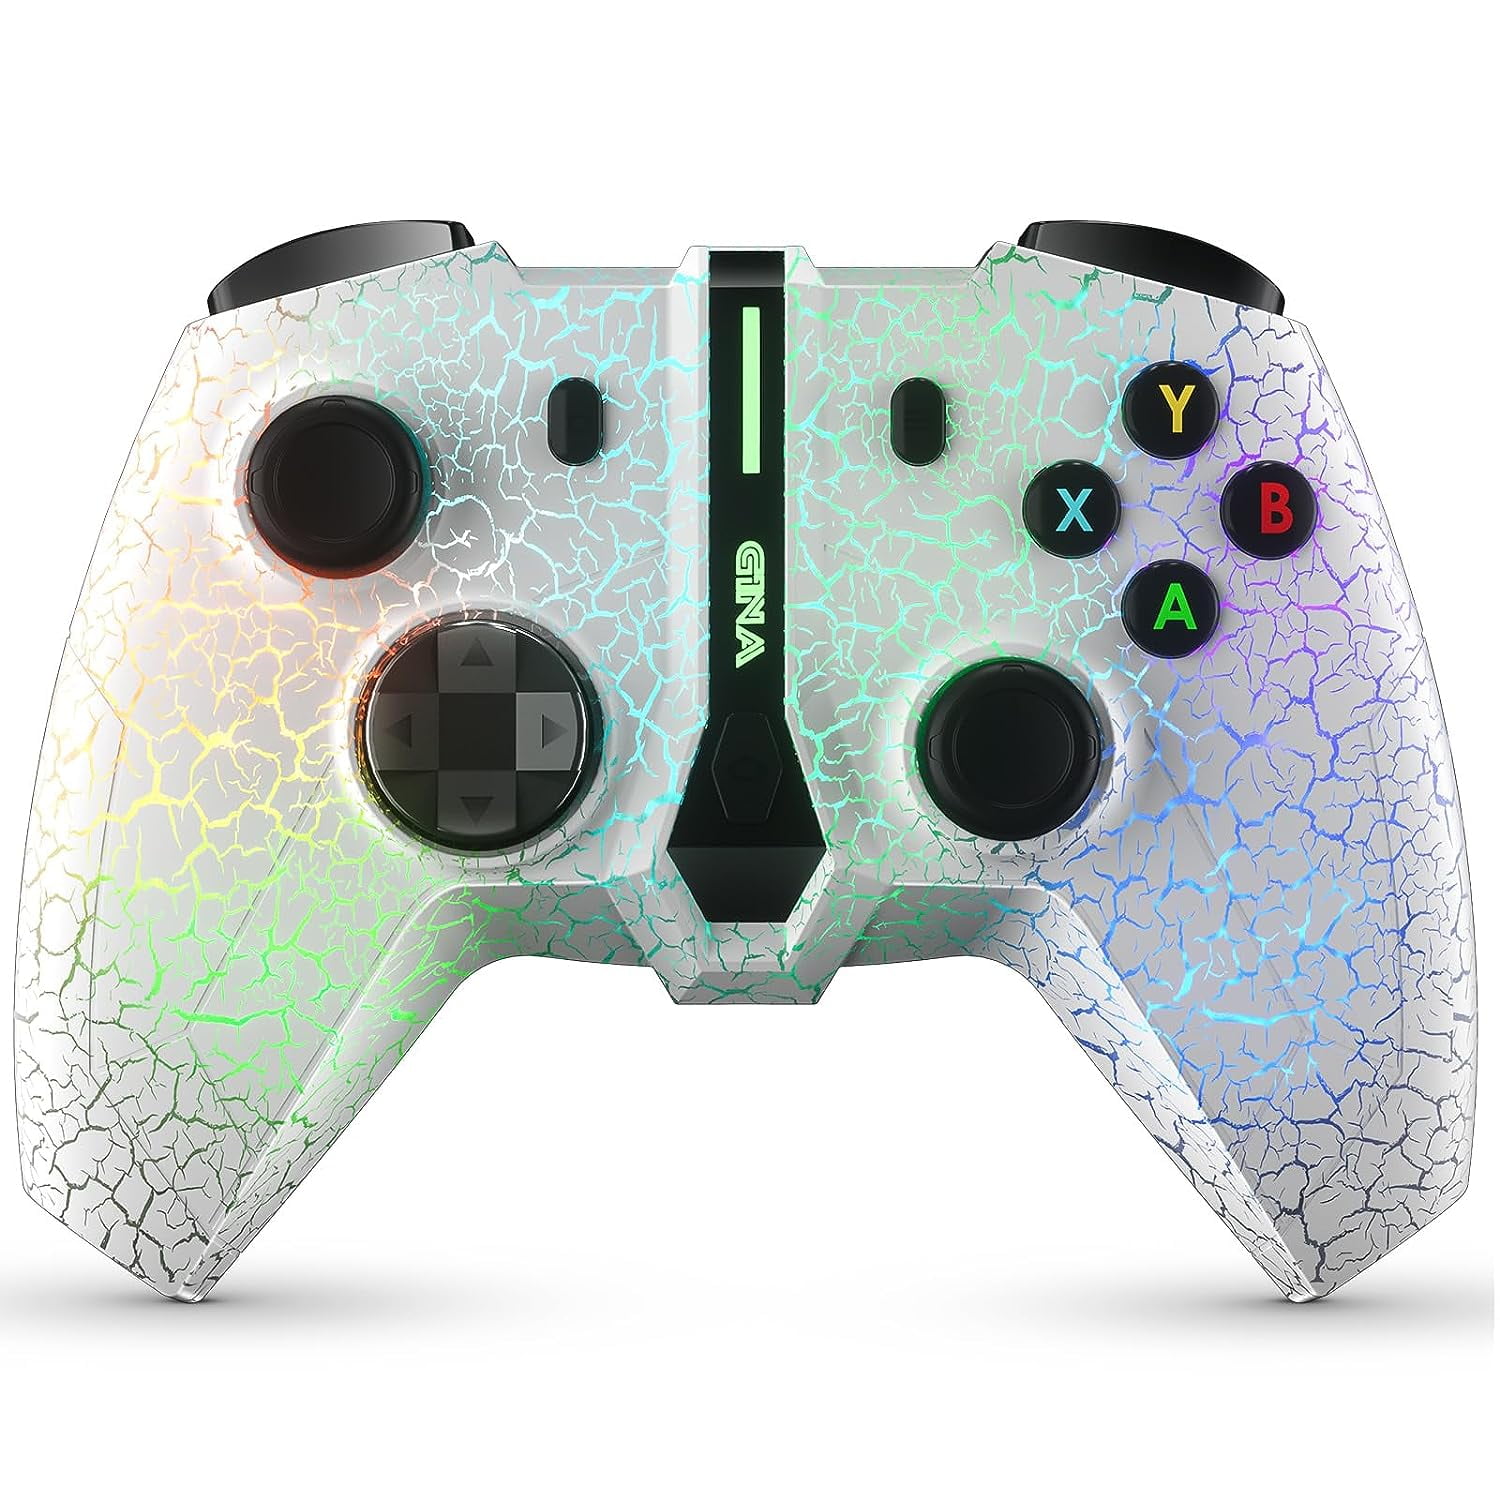 Game Controller, Wireless Controller Compatible with Xbox One/One